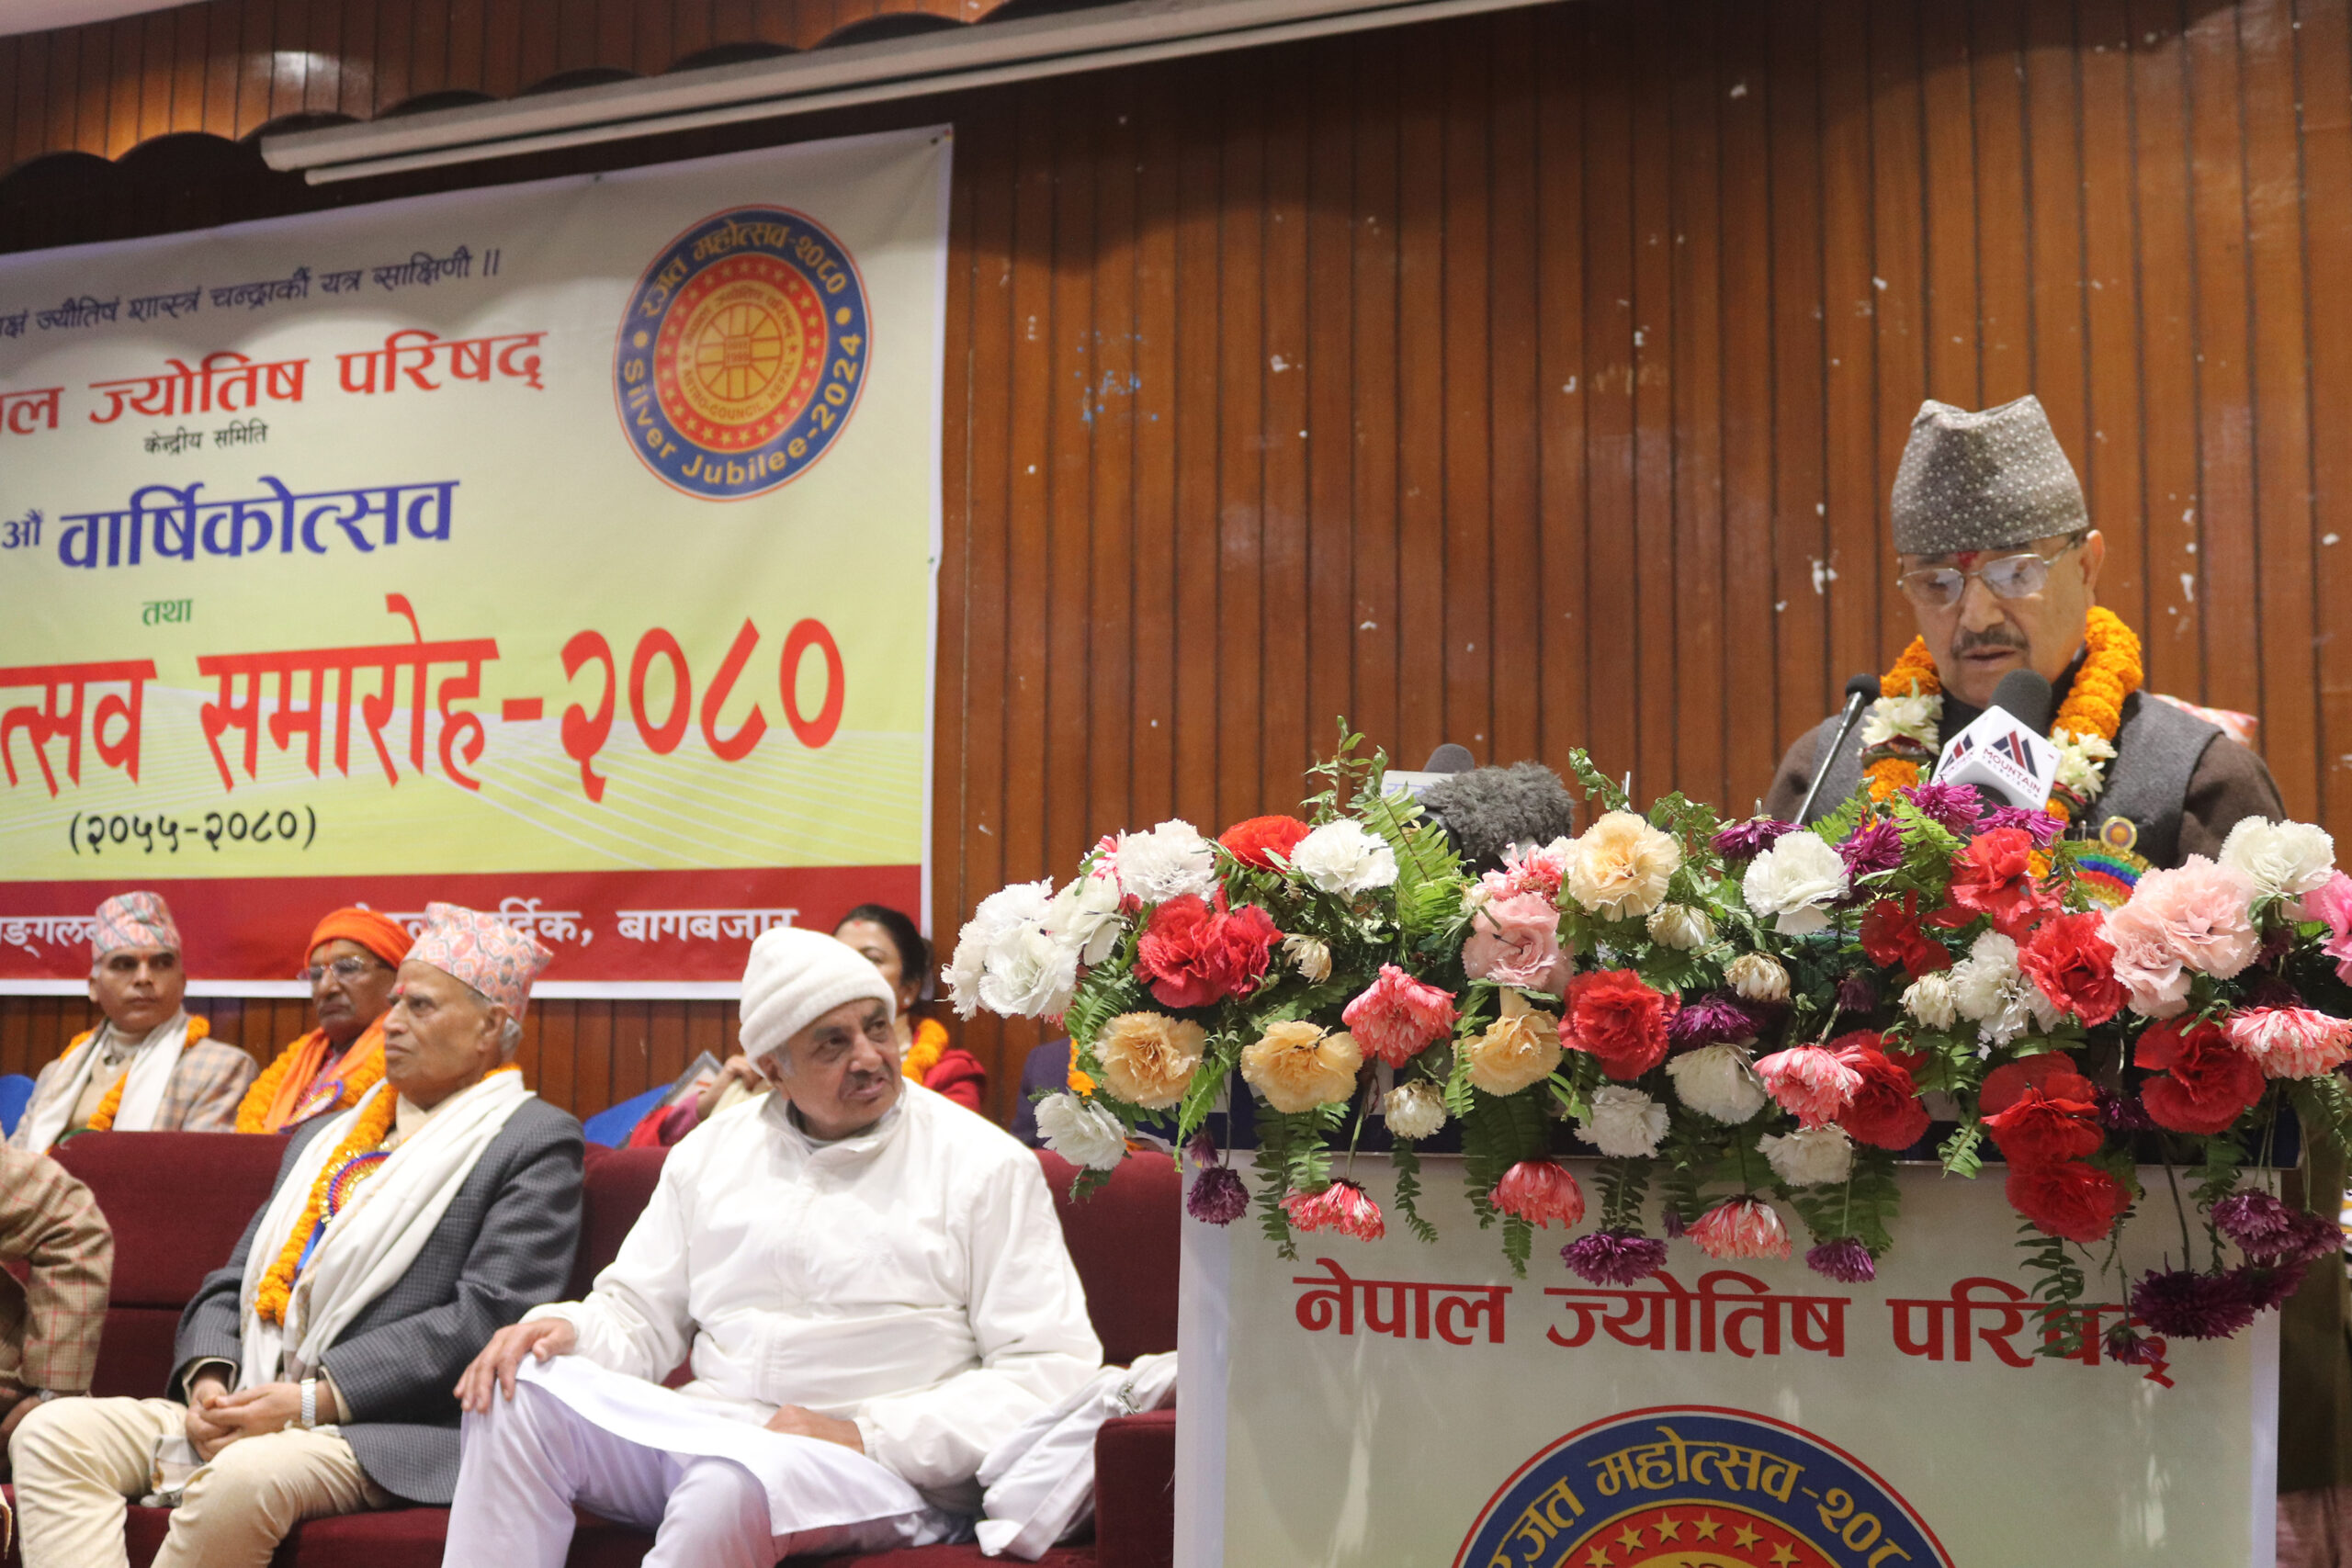 DPM Khadka stresses on making astrology accessible to all